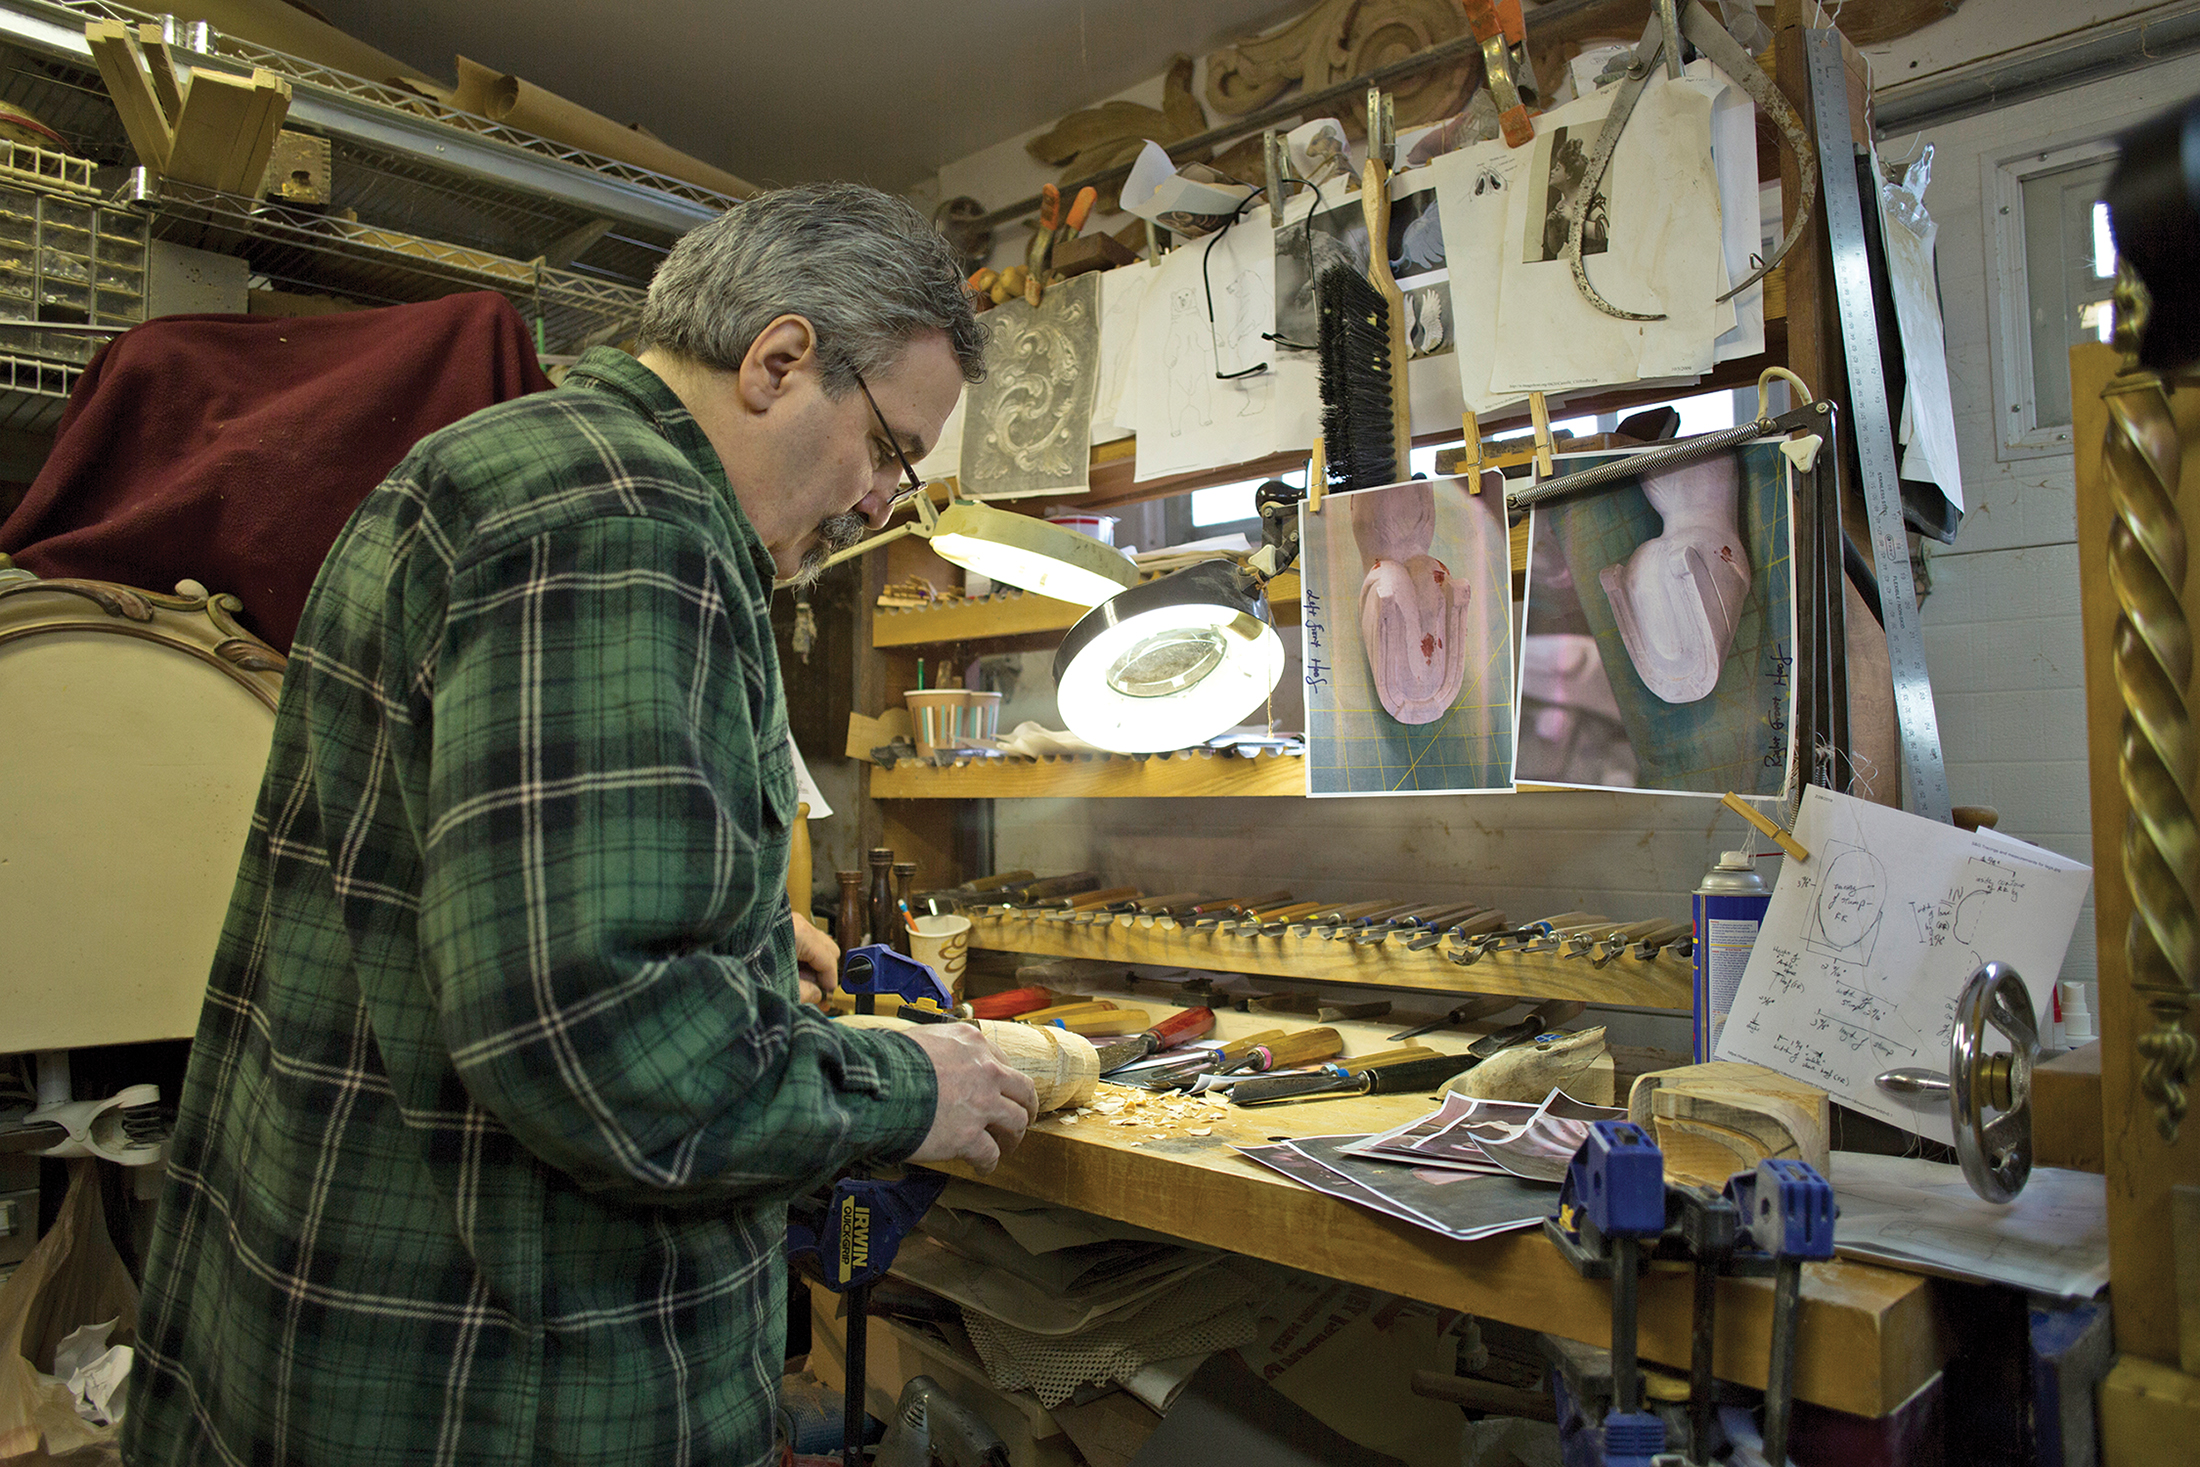 In his workshop, he carves a new leg and hoof for an antique carousel horse. (Photo by Melissa Rocha)